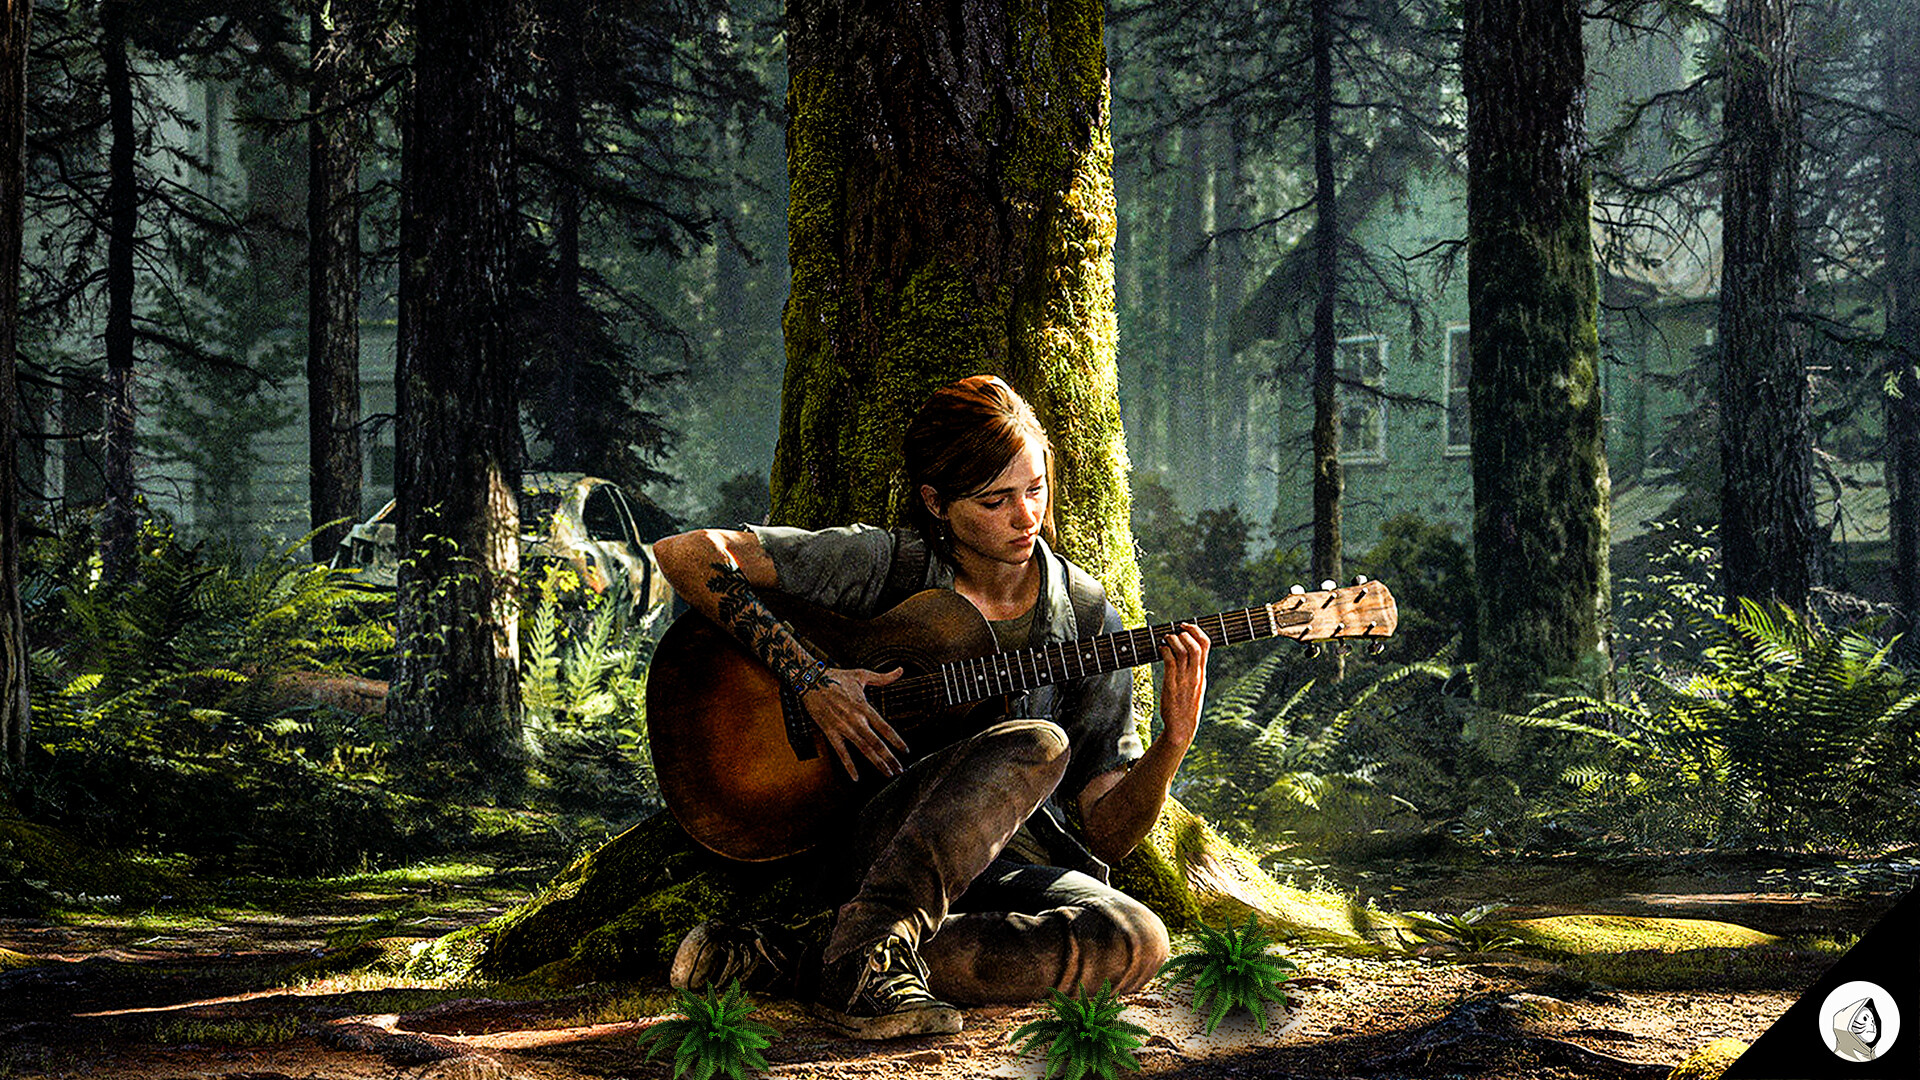 Ellie-The Last of Us (Photomanipulation/wallpaper) by